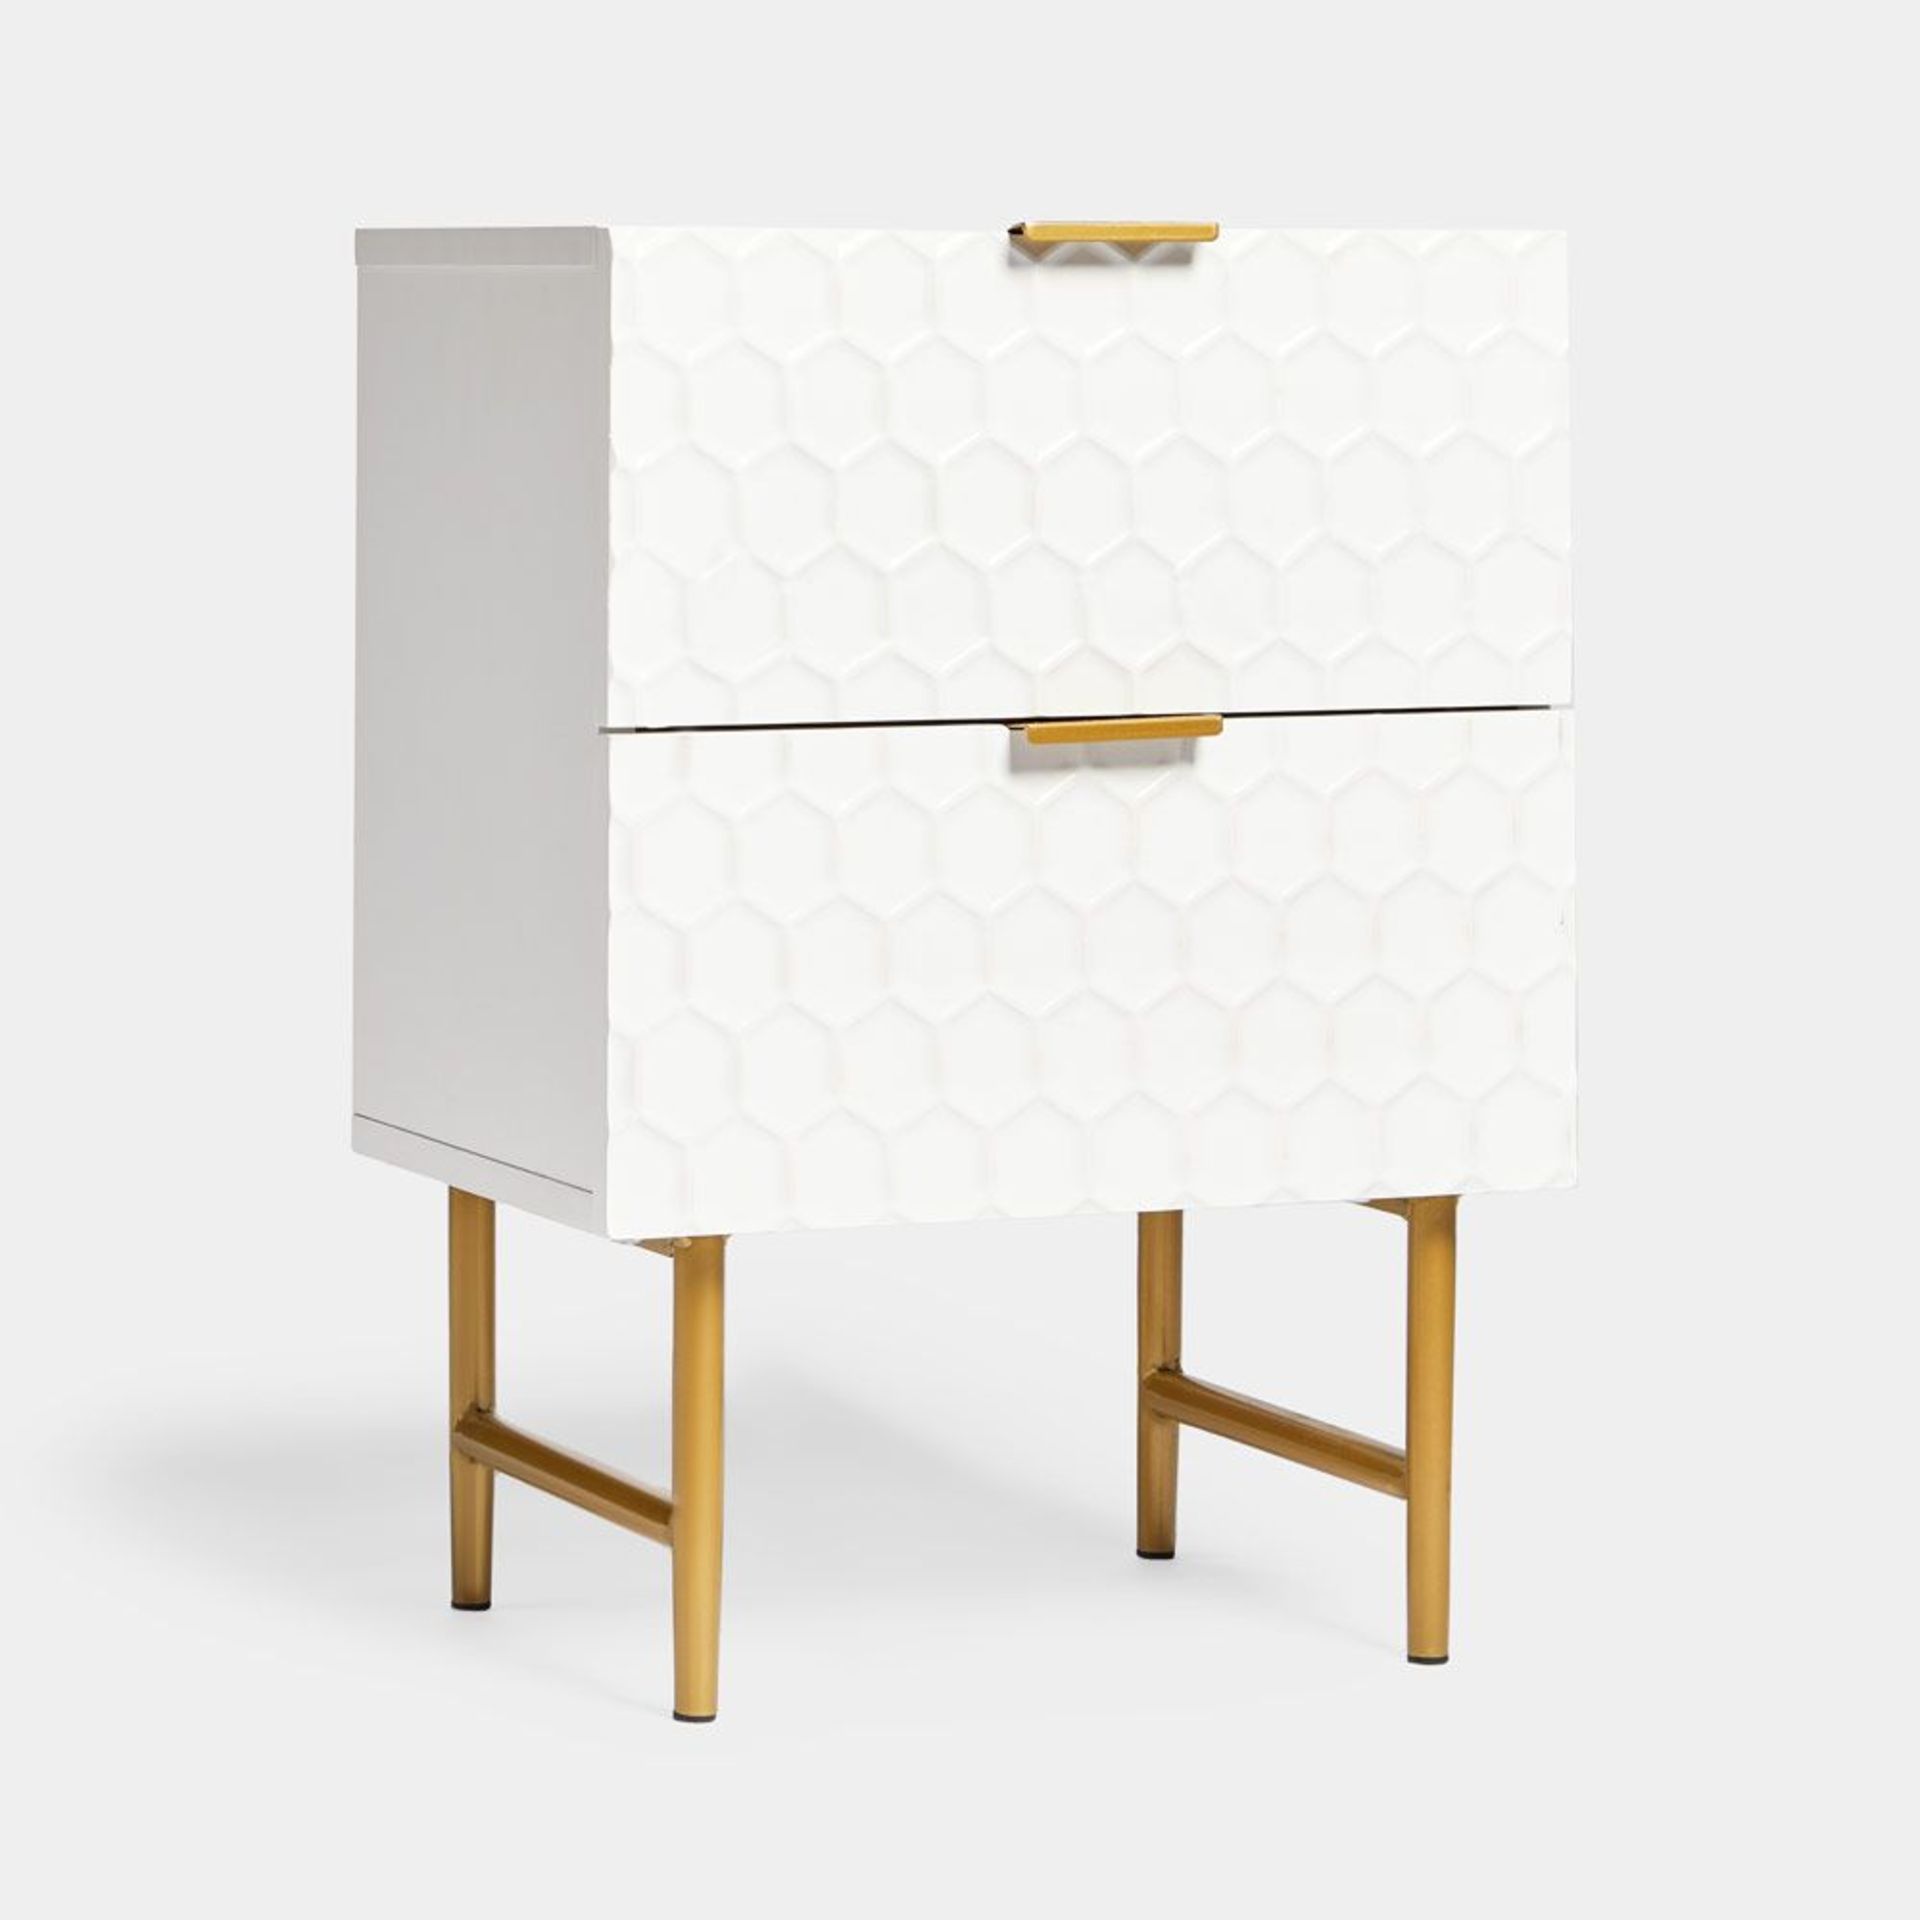 Honeycomb Bedside Cabinet. - BI. Finish off your space with this sweet and simple honeycomb